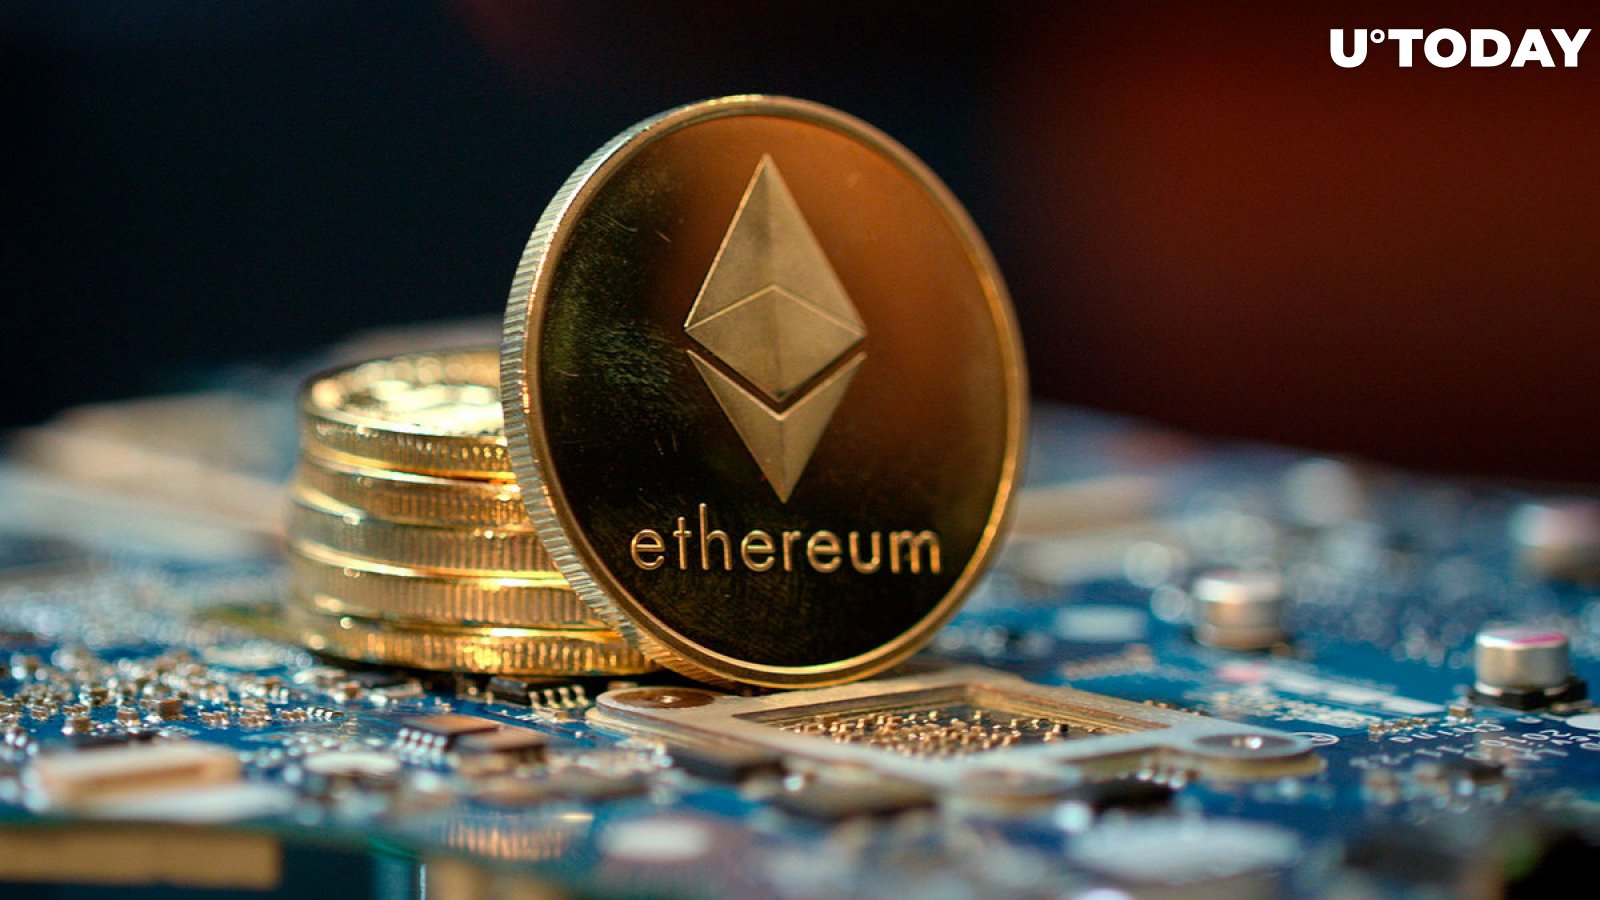 ETH Tops $4,000, Leaves Ethereum Trader With Liquidation Loss